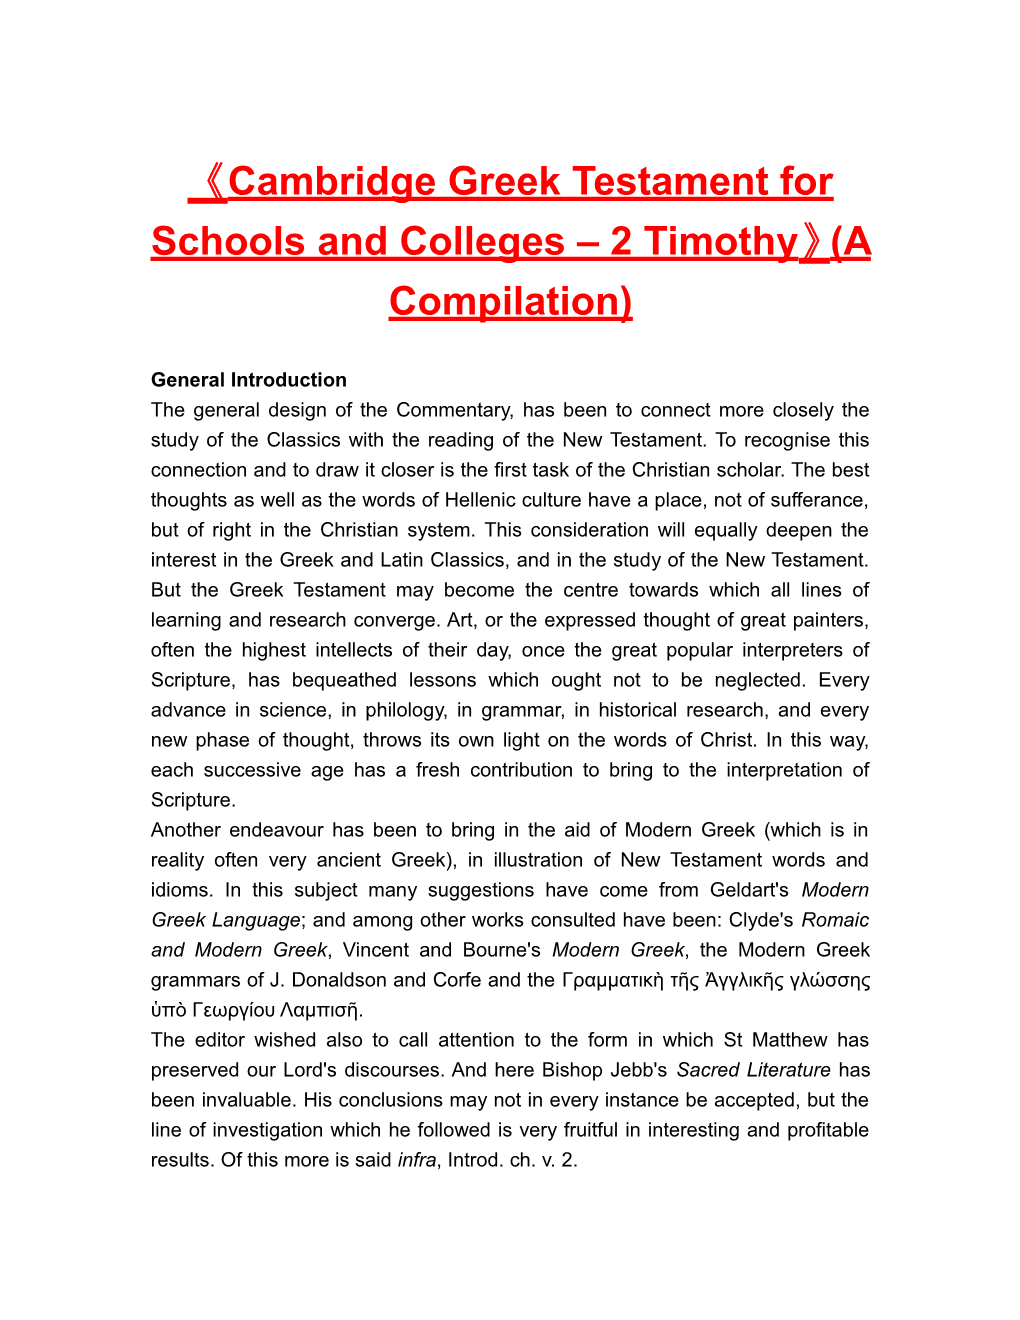 Cambridgegreek Testament for Schools and Colleges 2 Timothy (A Compilation)